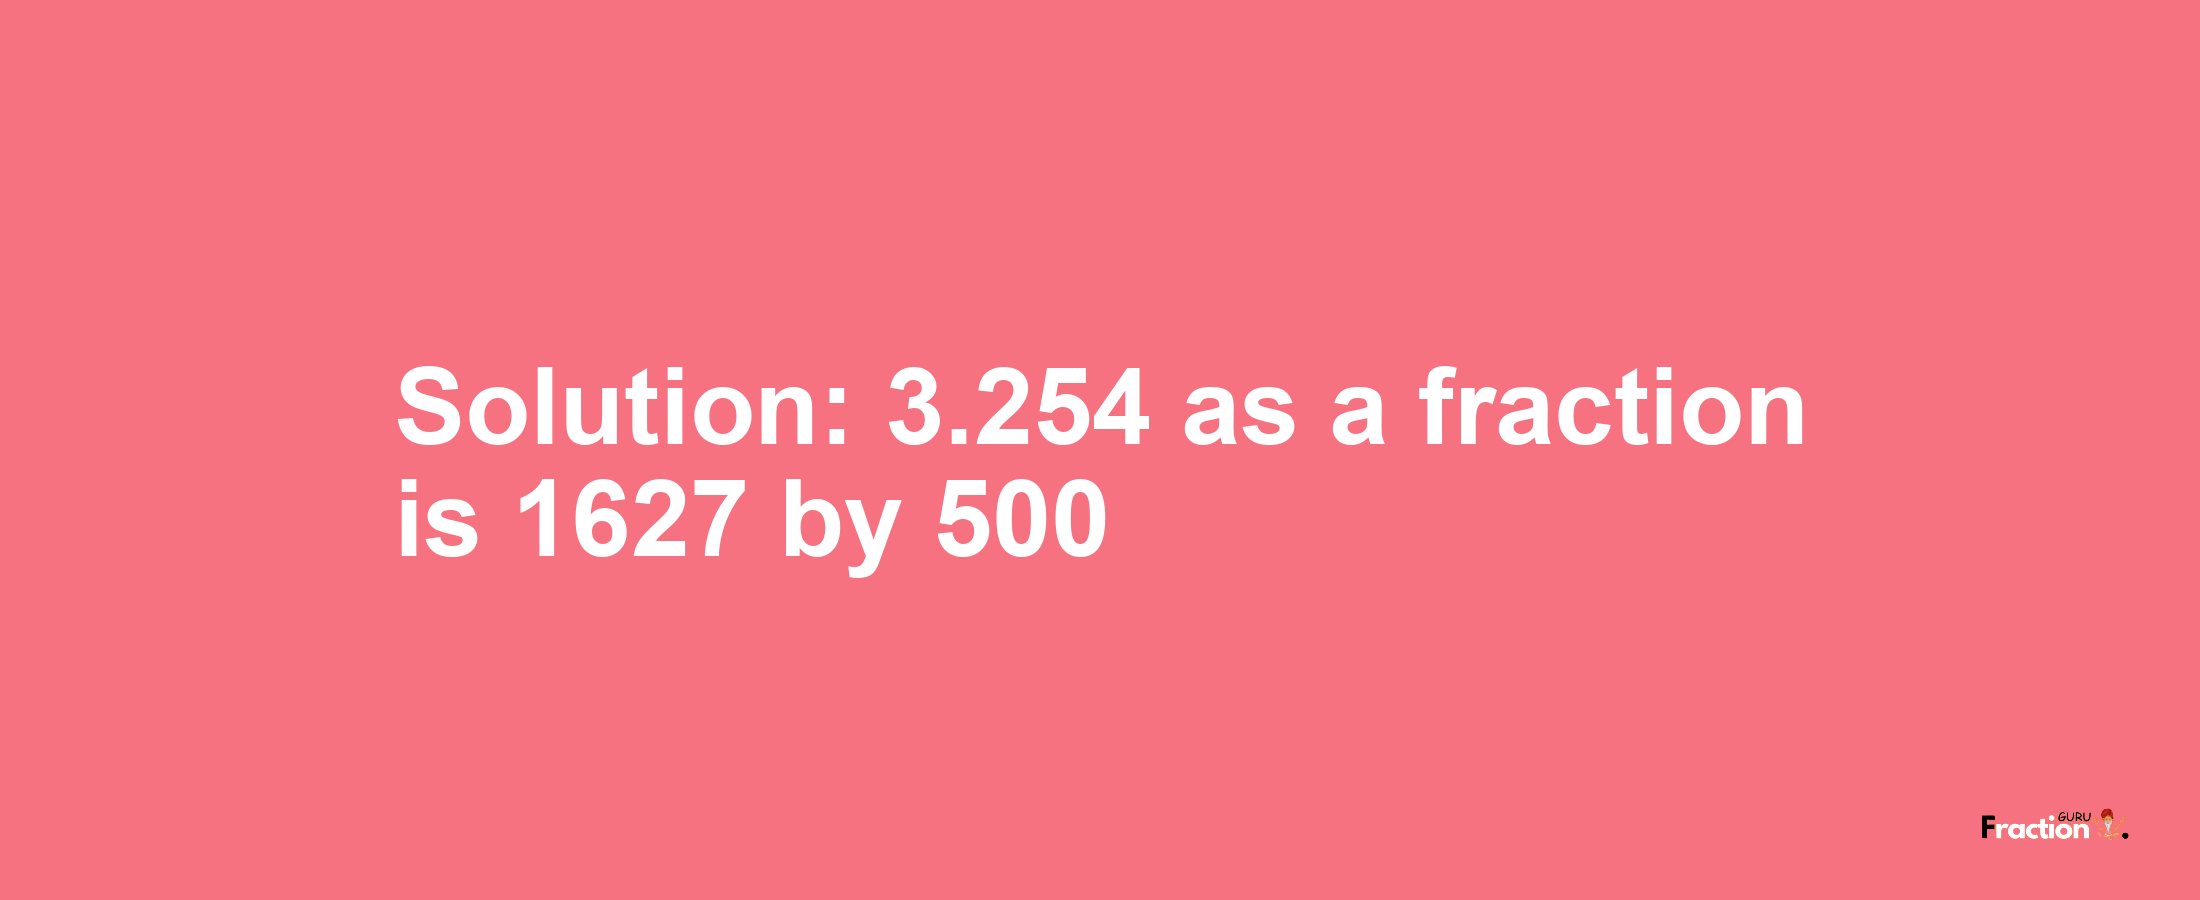 Solution:3.254 as a fraction is 1627/500